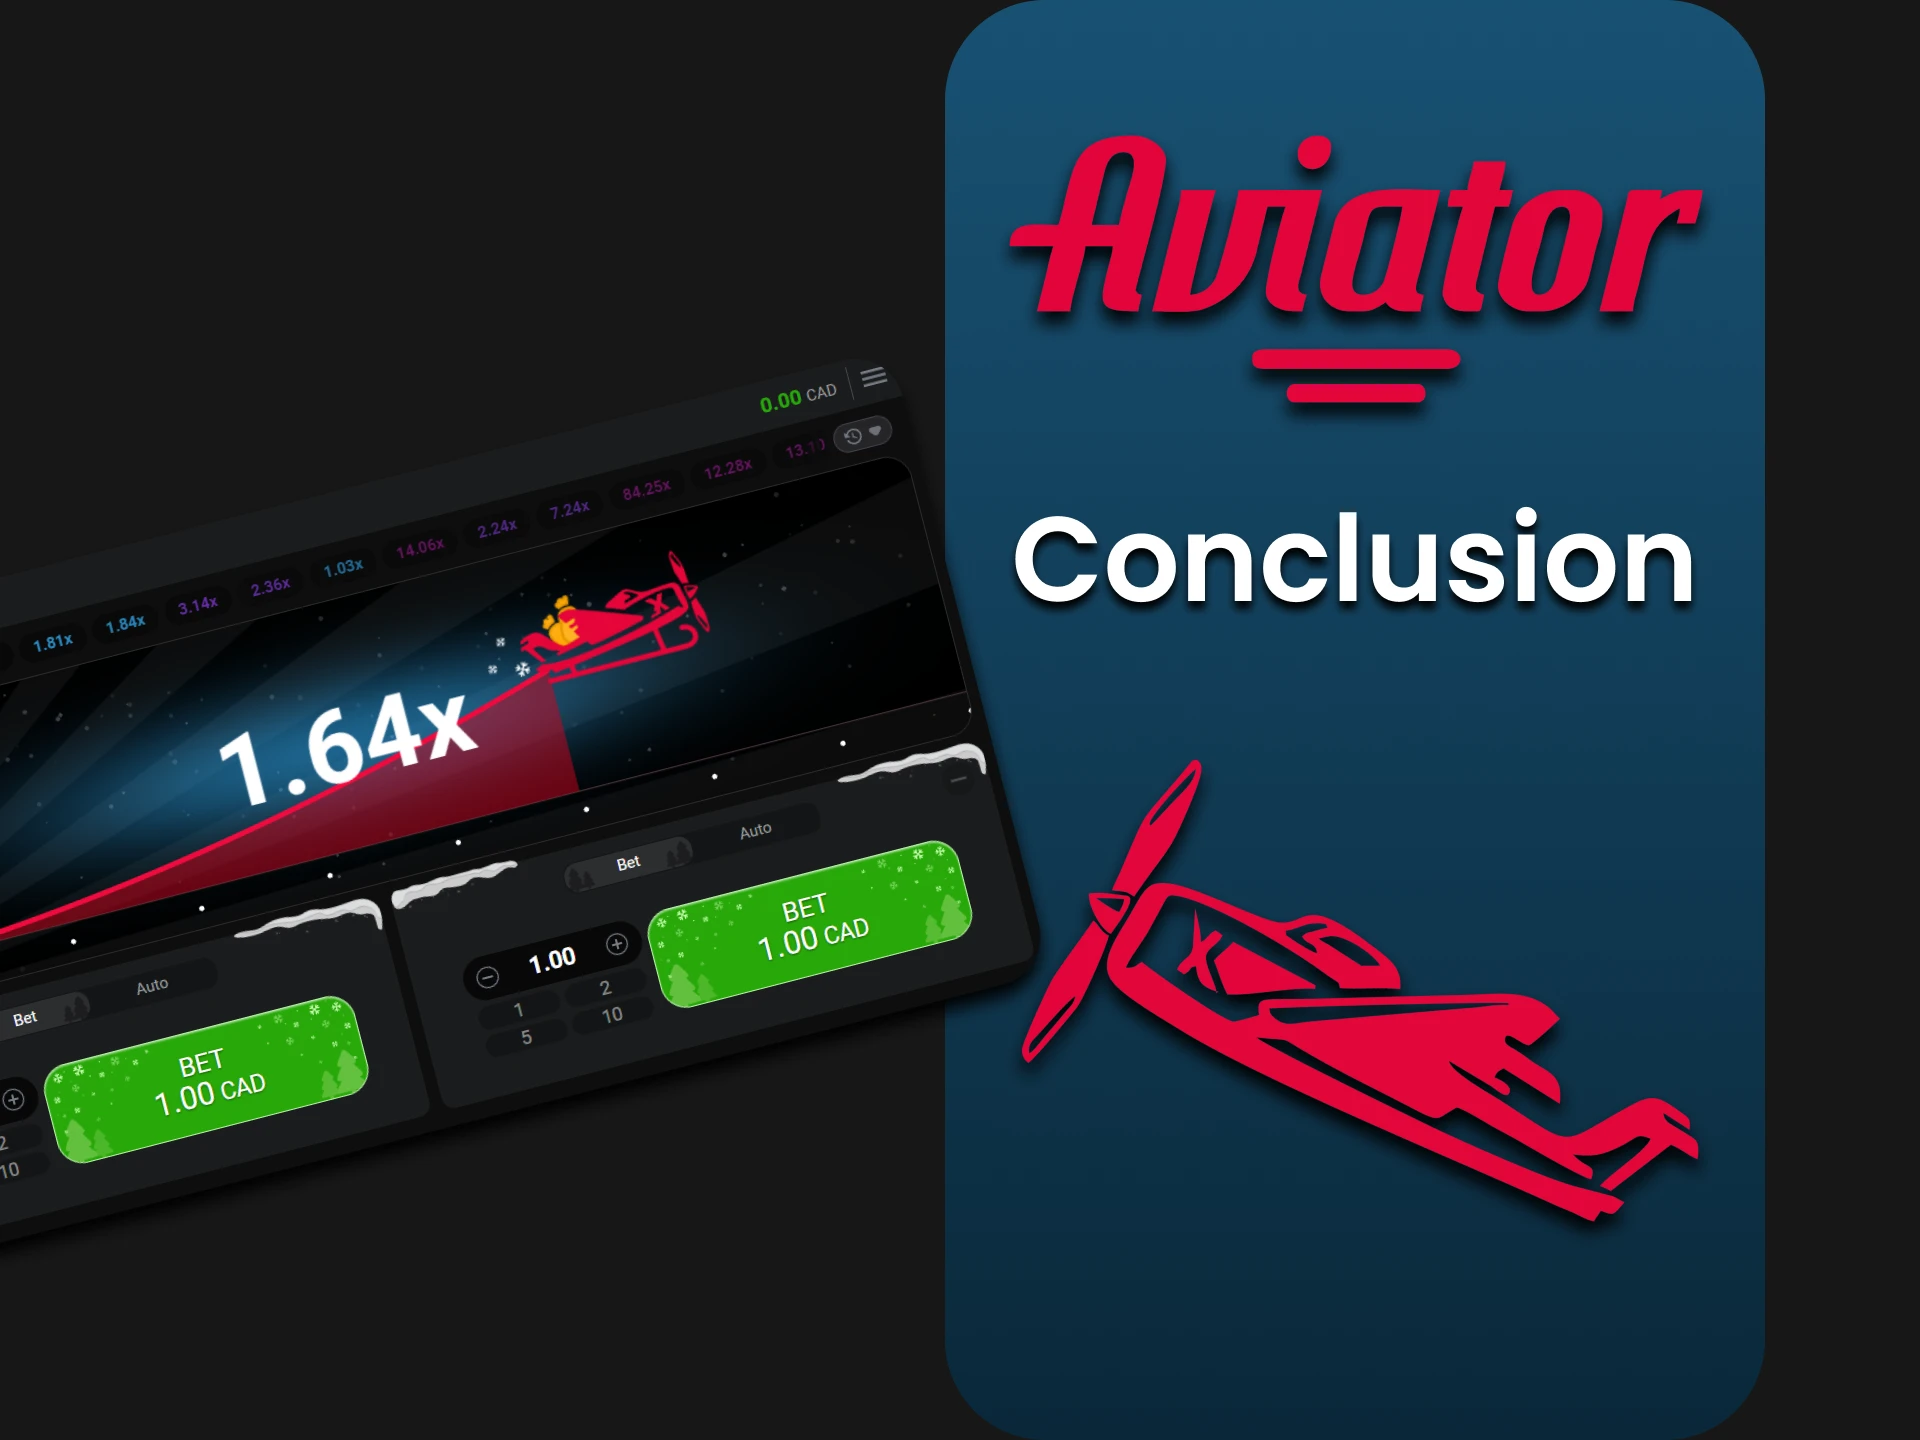 Aviator is a high-quality and reliable game.